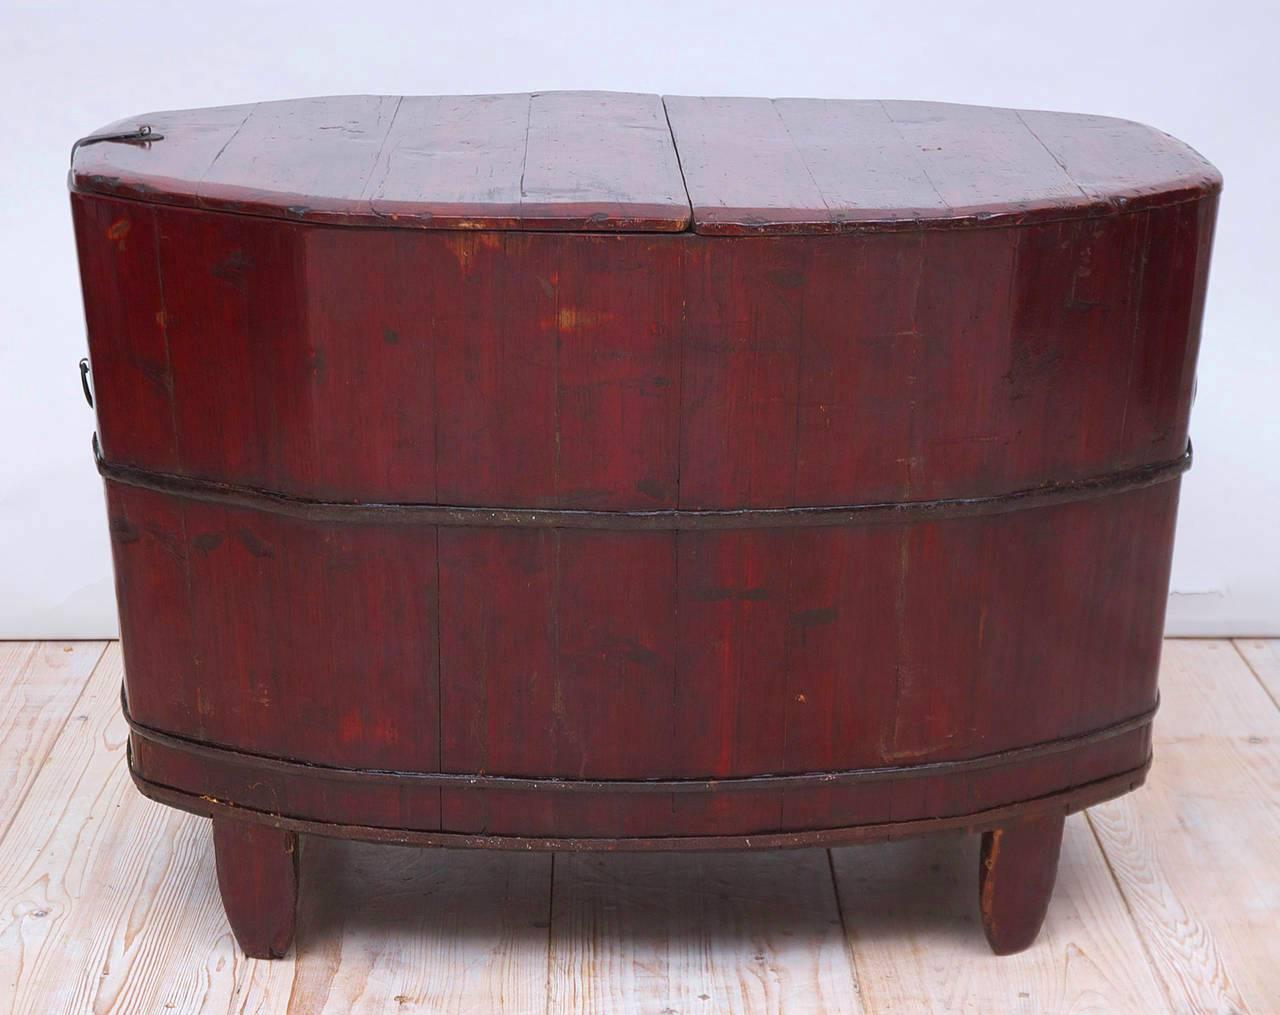 Qing Antique 19th Century Chinese Grain Bin with Lacquered Cinnabar-Colored Paint